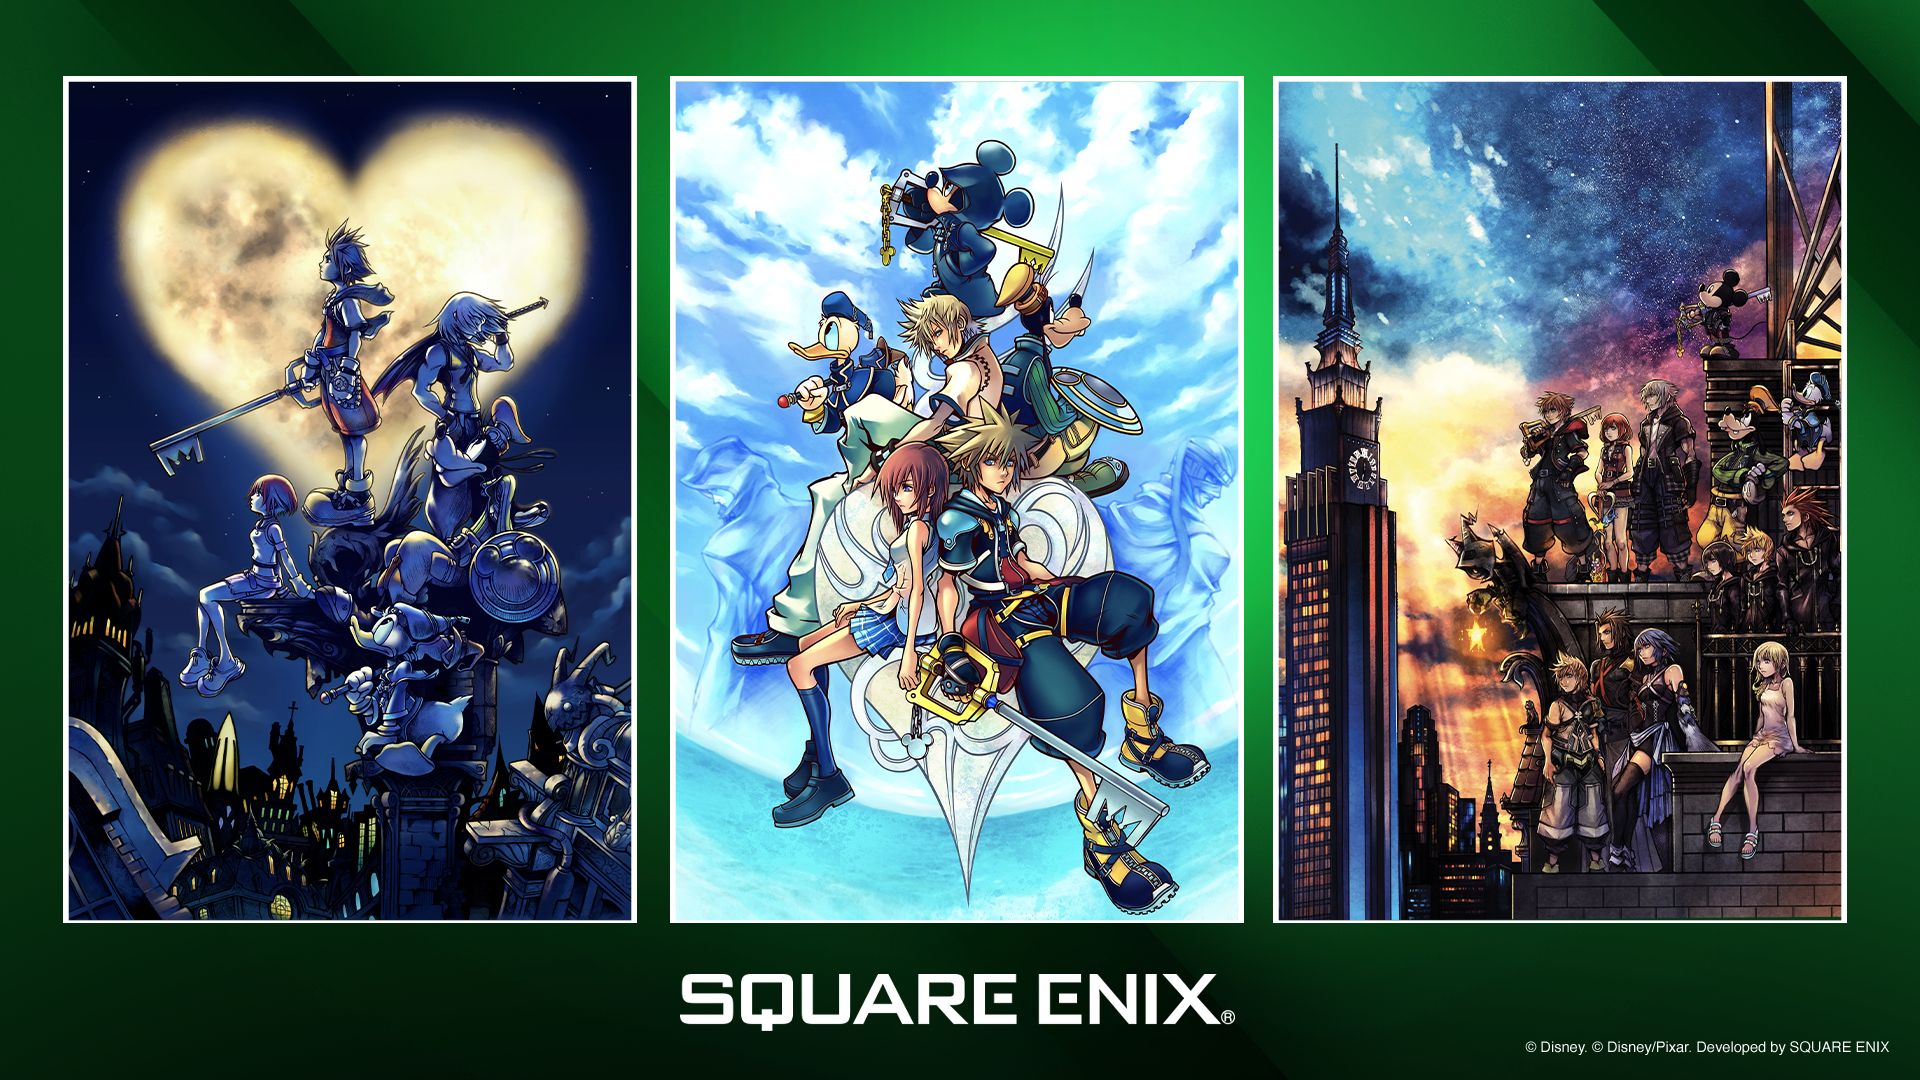 Reunite with Old friends and Make New Ones During the Square Enix Publisher Sale